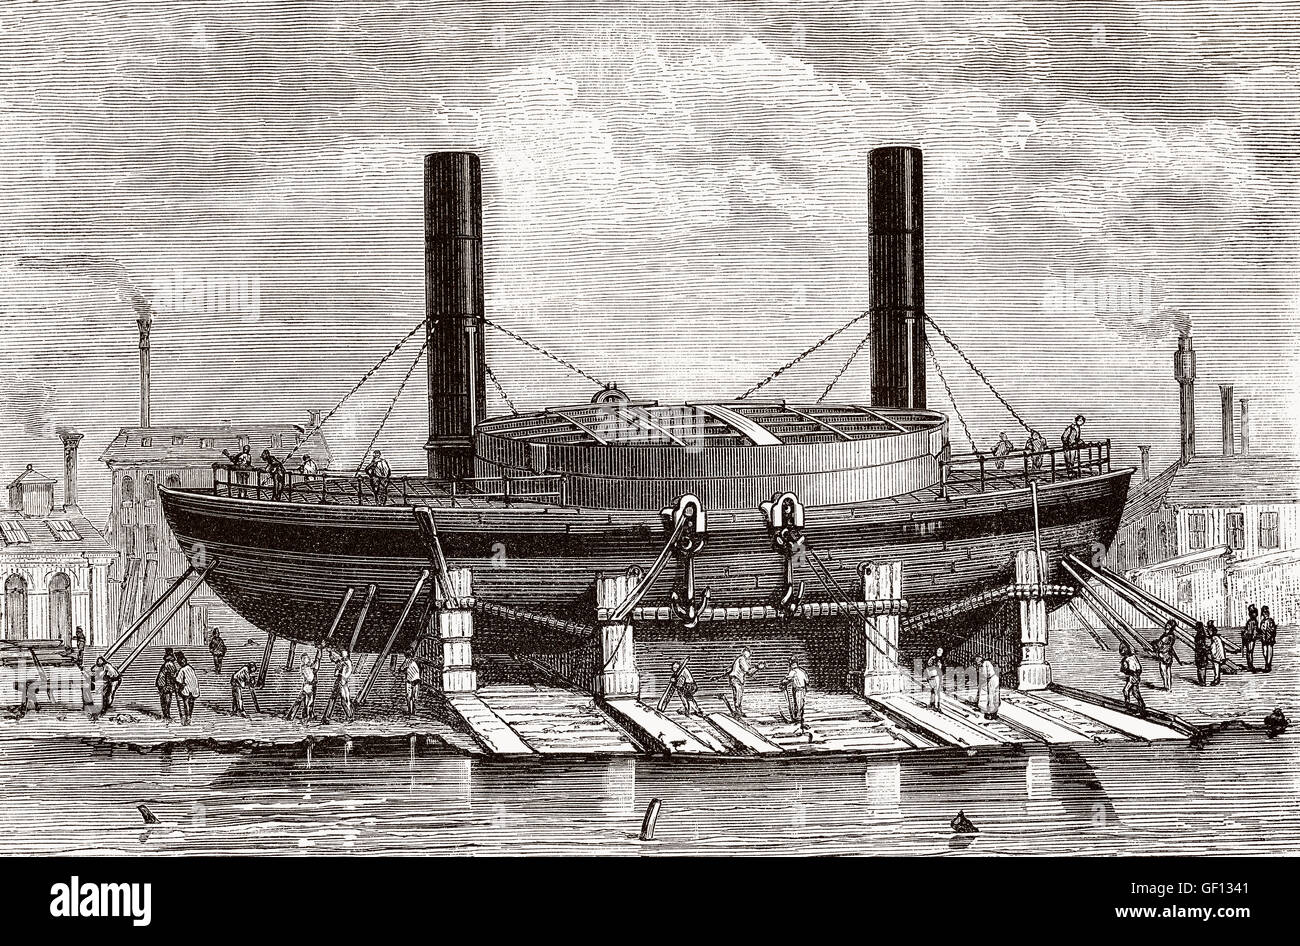 Vitse-admiral Popov, warship design by Andrei Alexandrovich Popov, 1821-1898, an officer of the Imperial Russian Navy and a nava Stock Photo